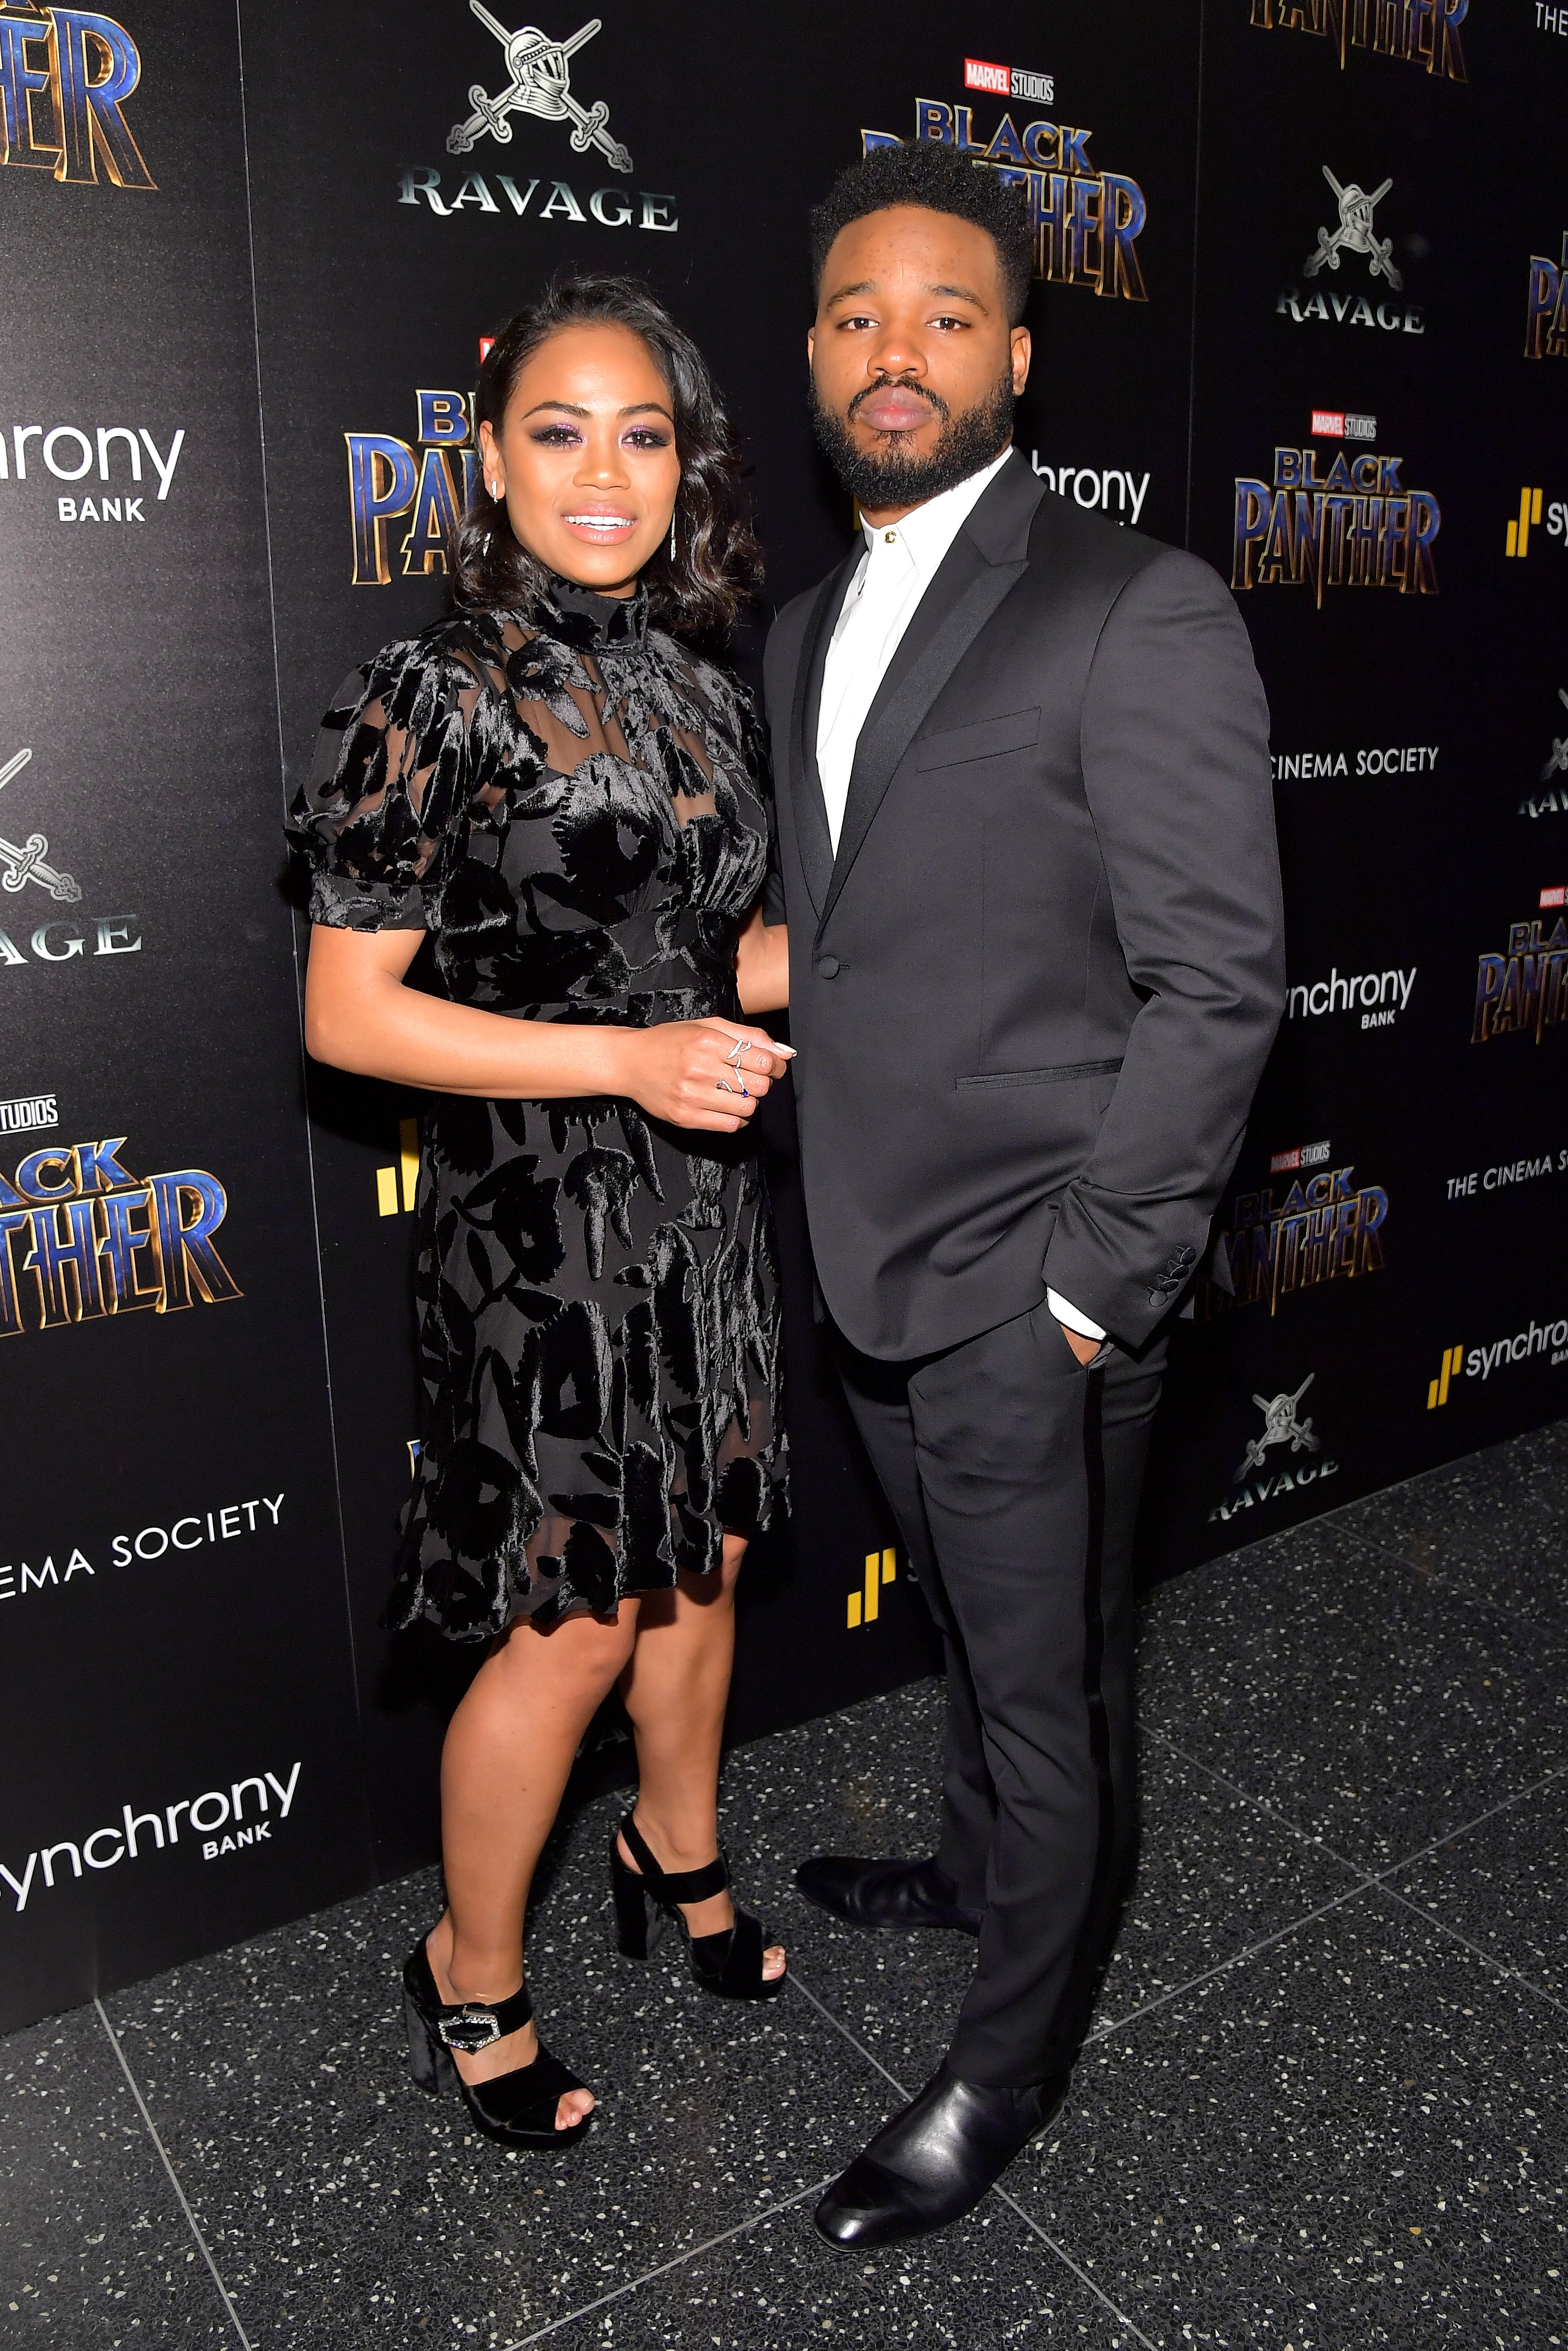 10 Adorable Photos Of ‘Black Panther’ Director Ryan Coogler And Wife Zinzi Evans That Will Make You Feel The Love